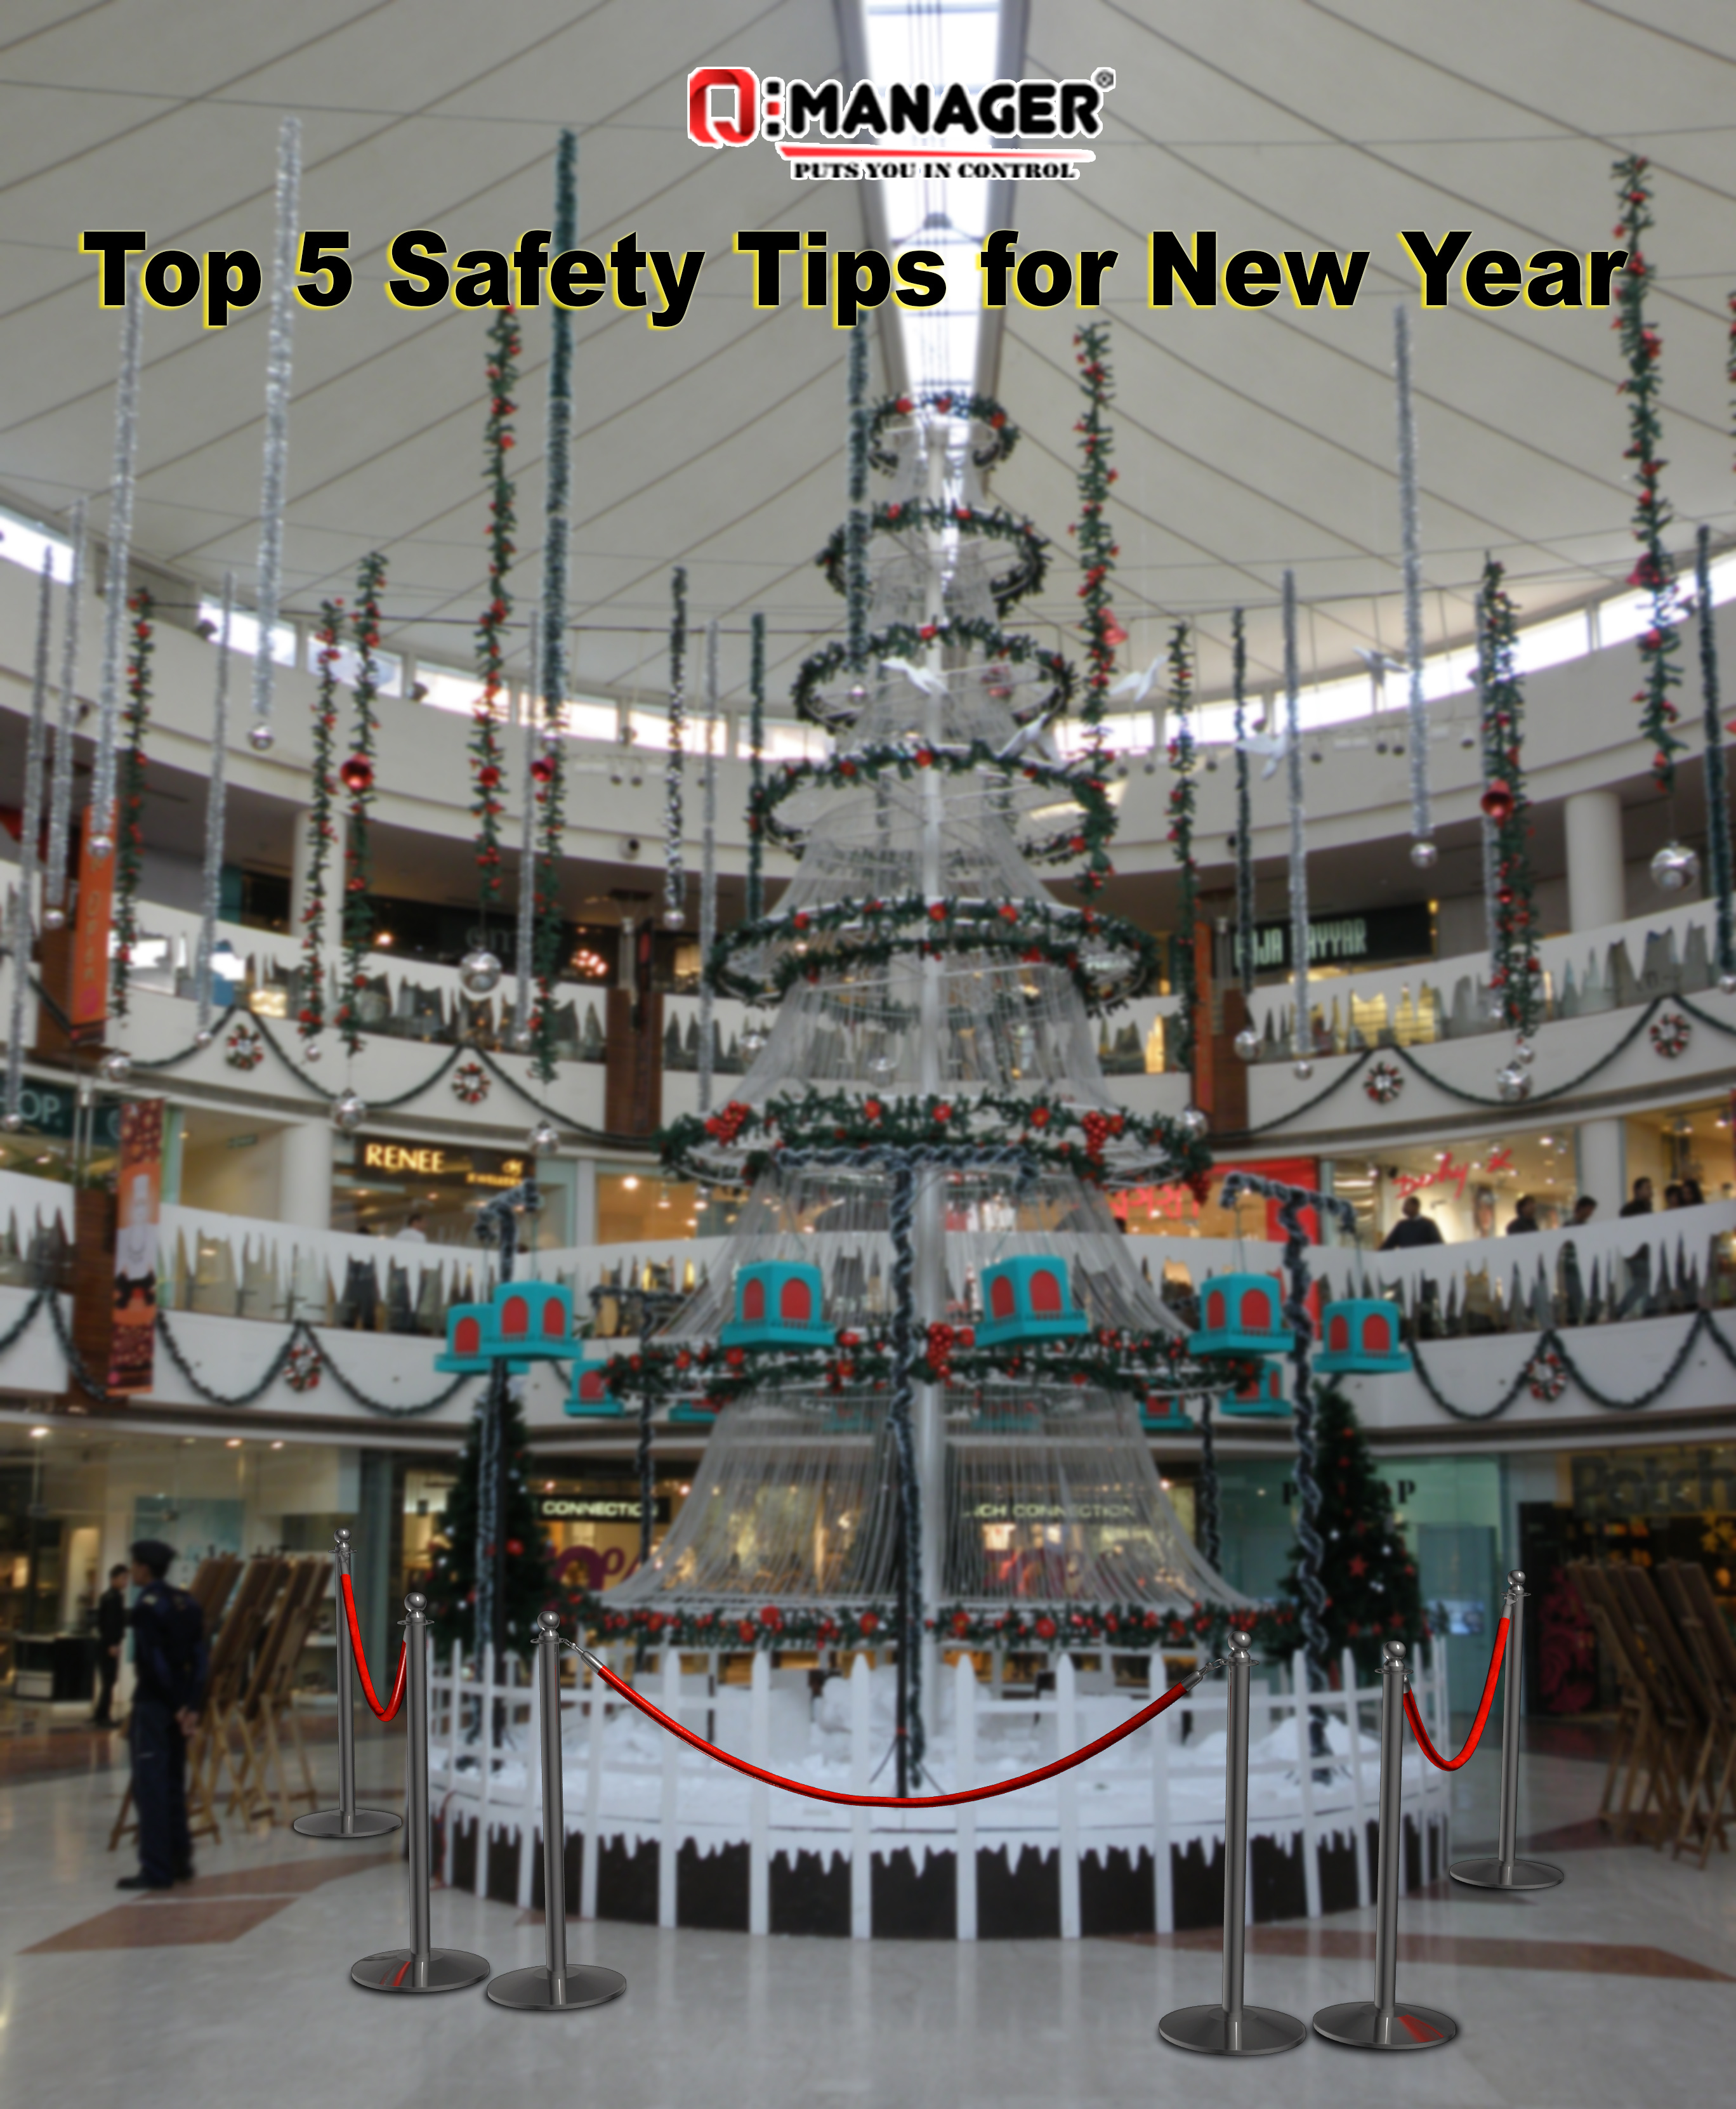 Top 5 Safety Tips for New Year